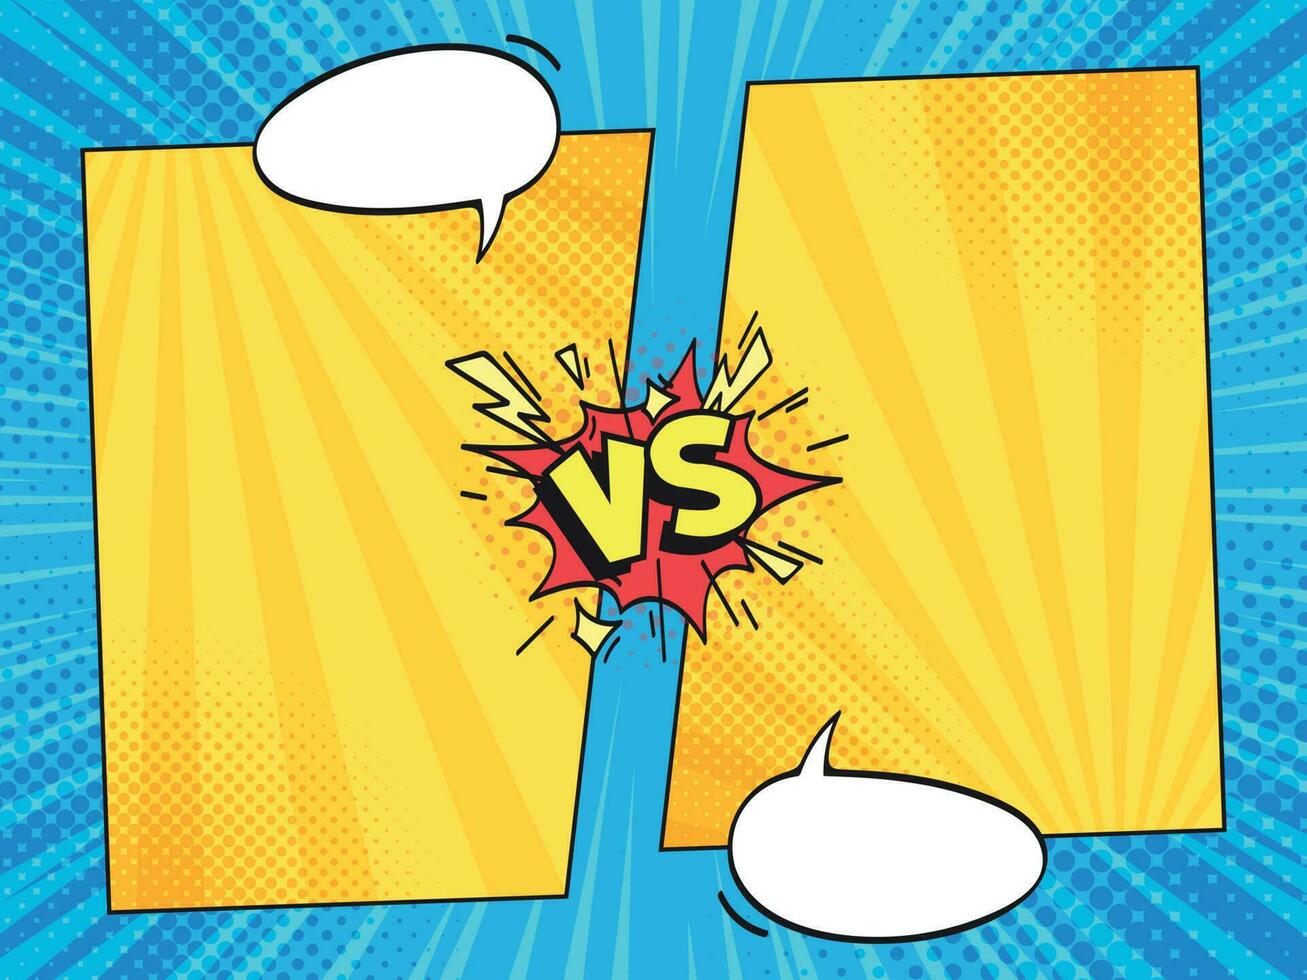 Versus comic frame. Vs comics book frames with cartoon text speech bubbles on halftone stripes background vector template